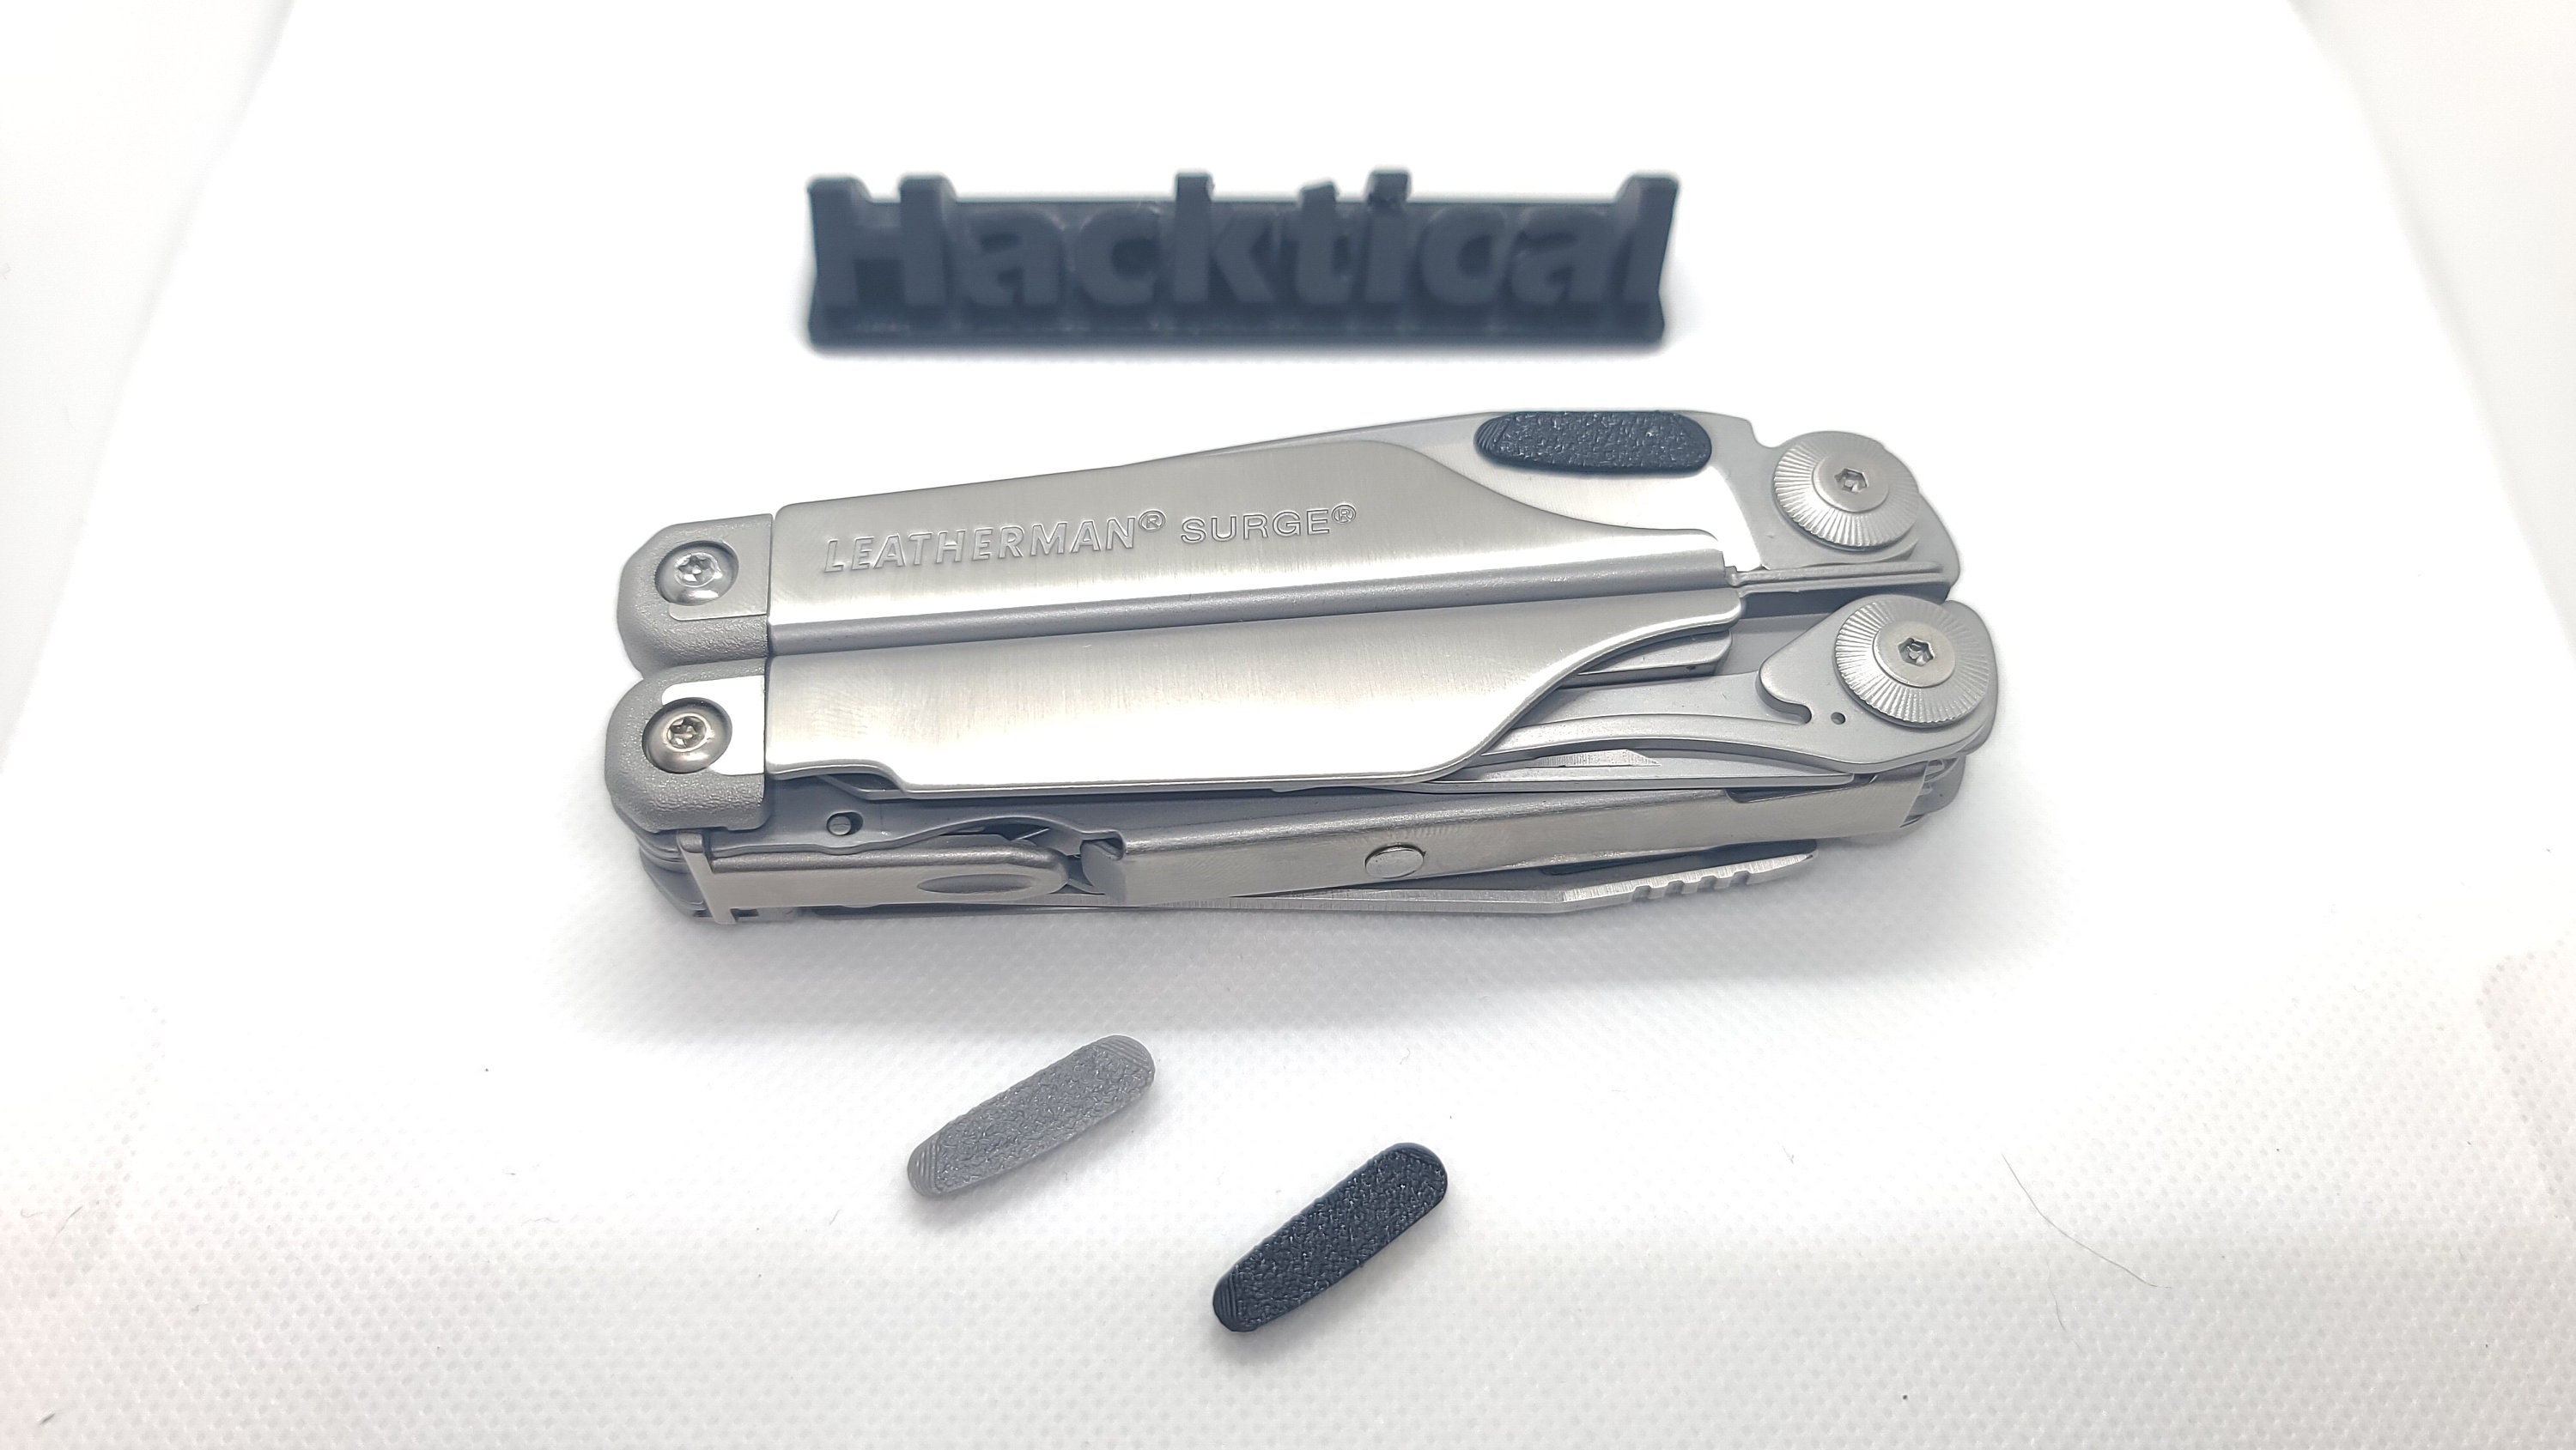 How-to: Leatherman SURGE 